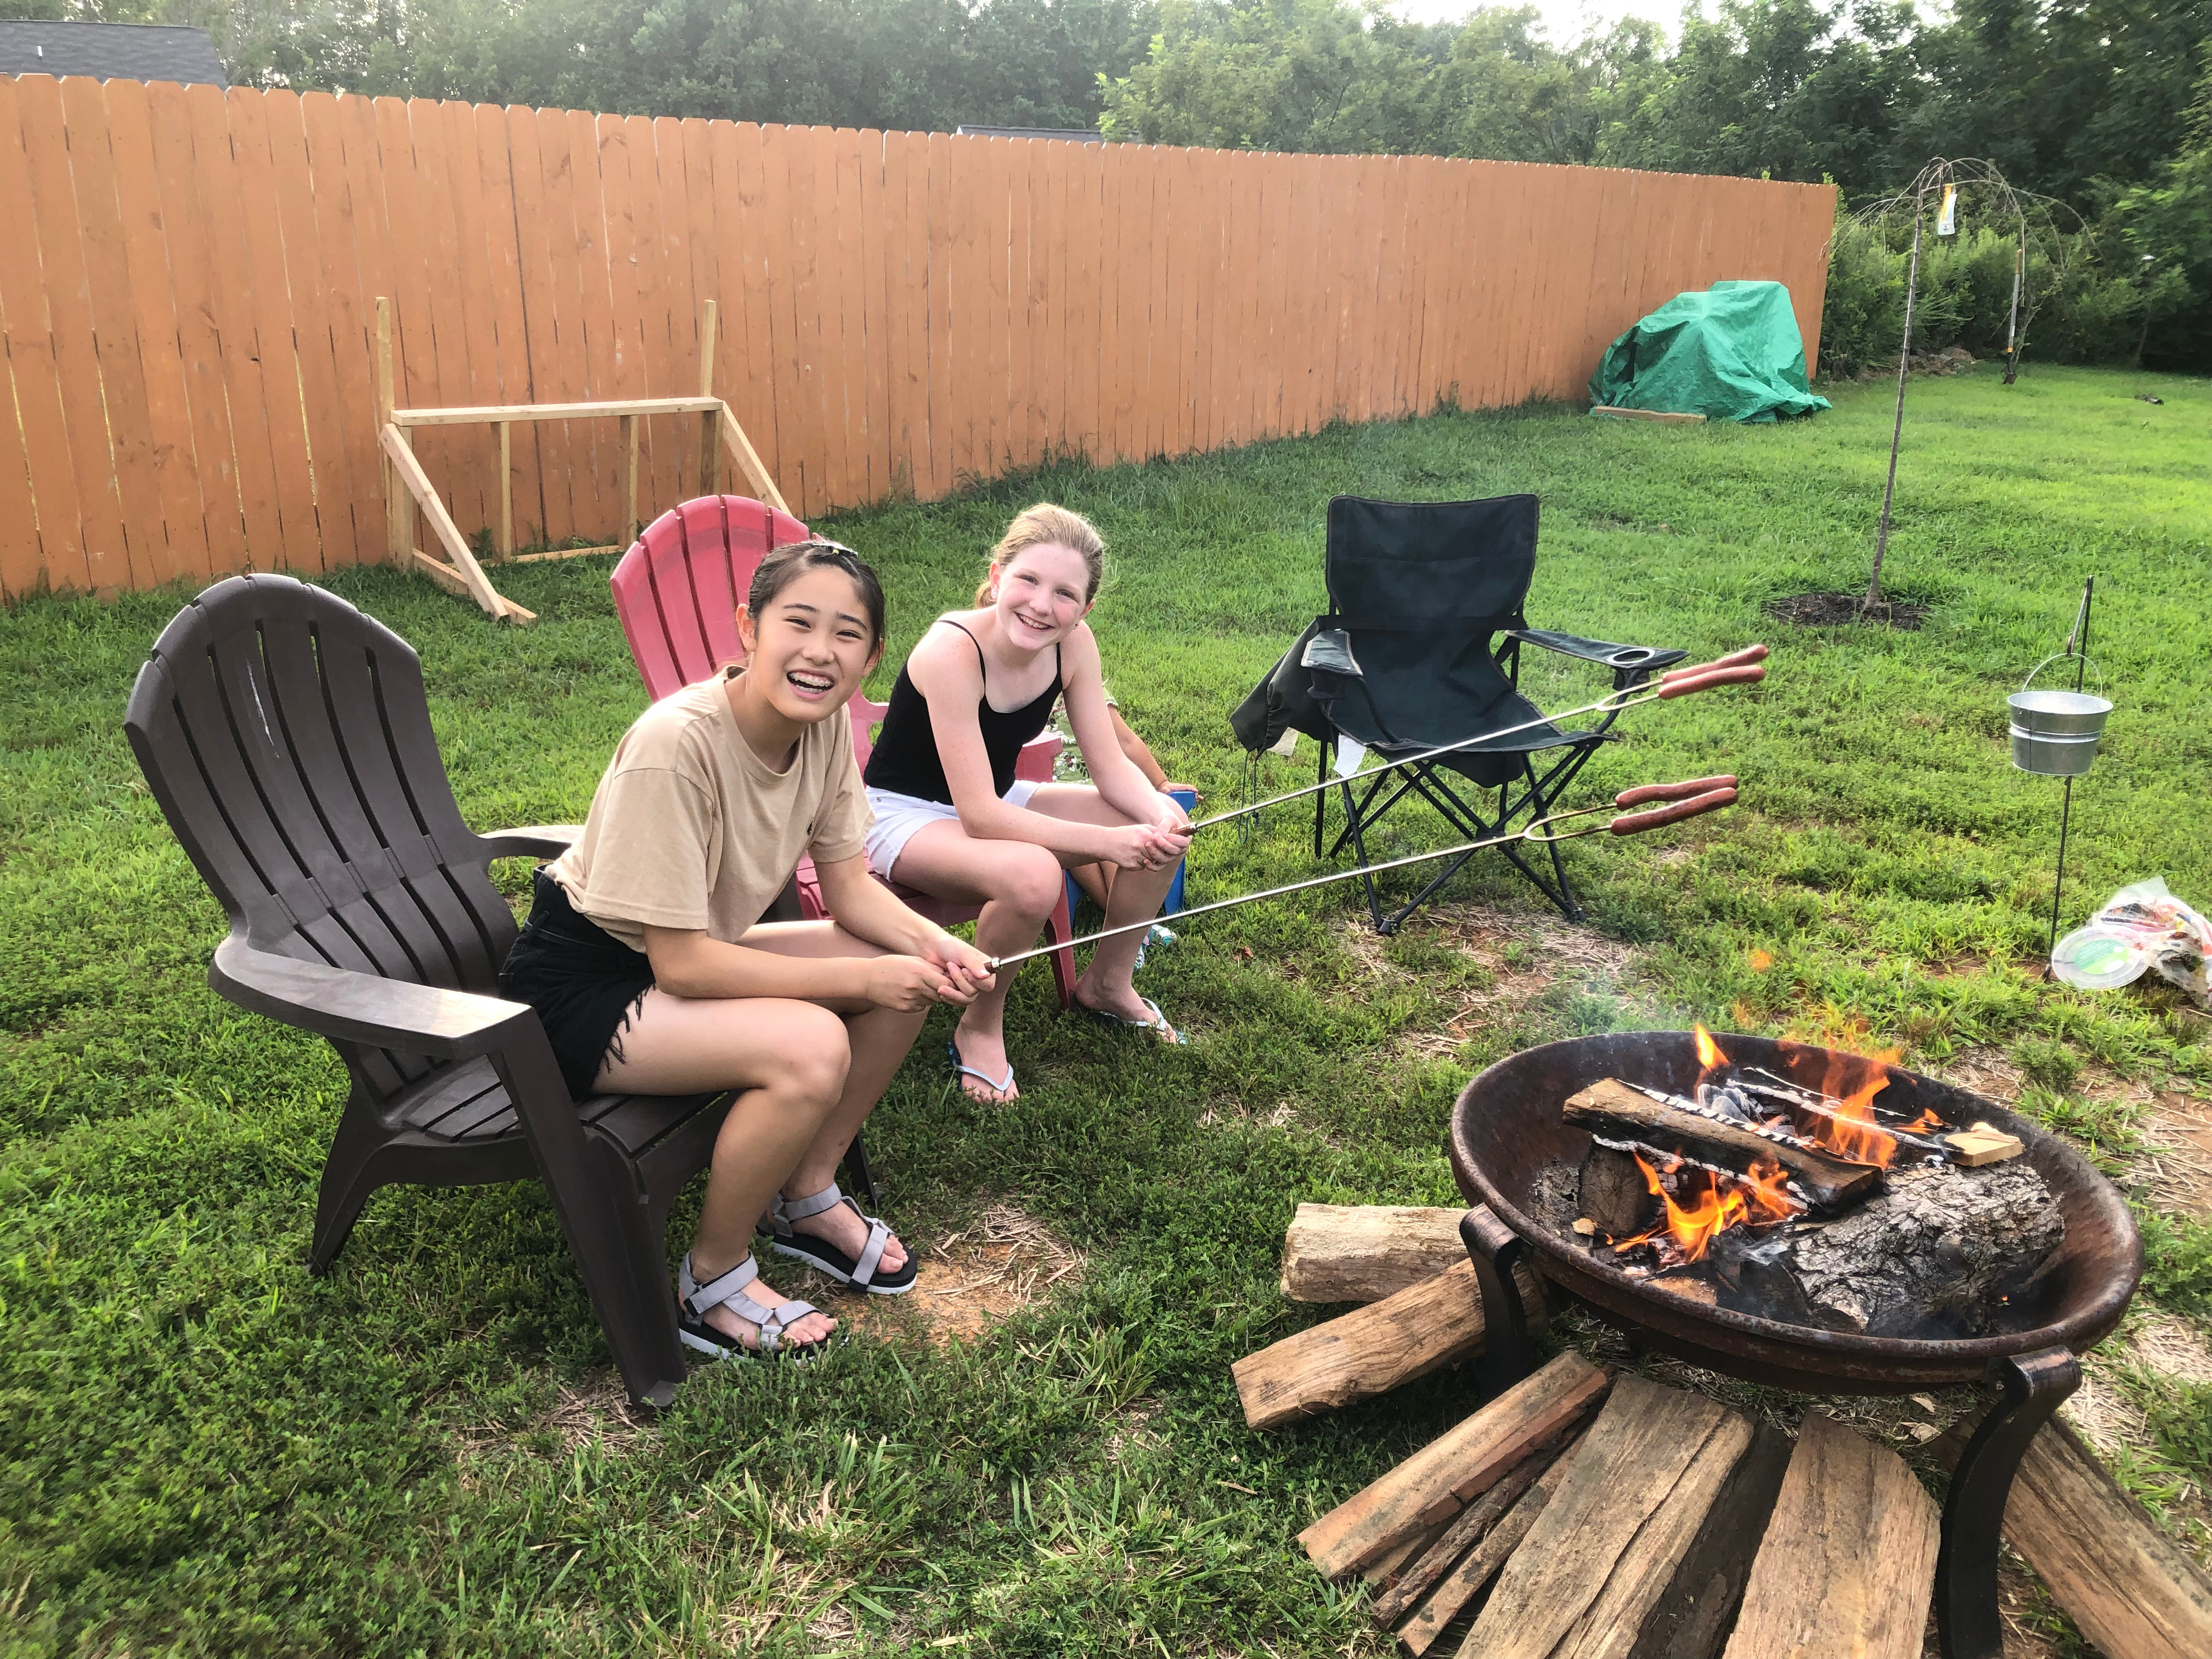 A Japanese Exchange student and her American host sit by a campfire